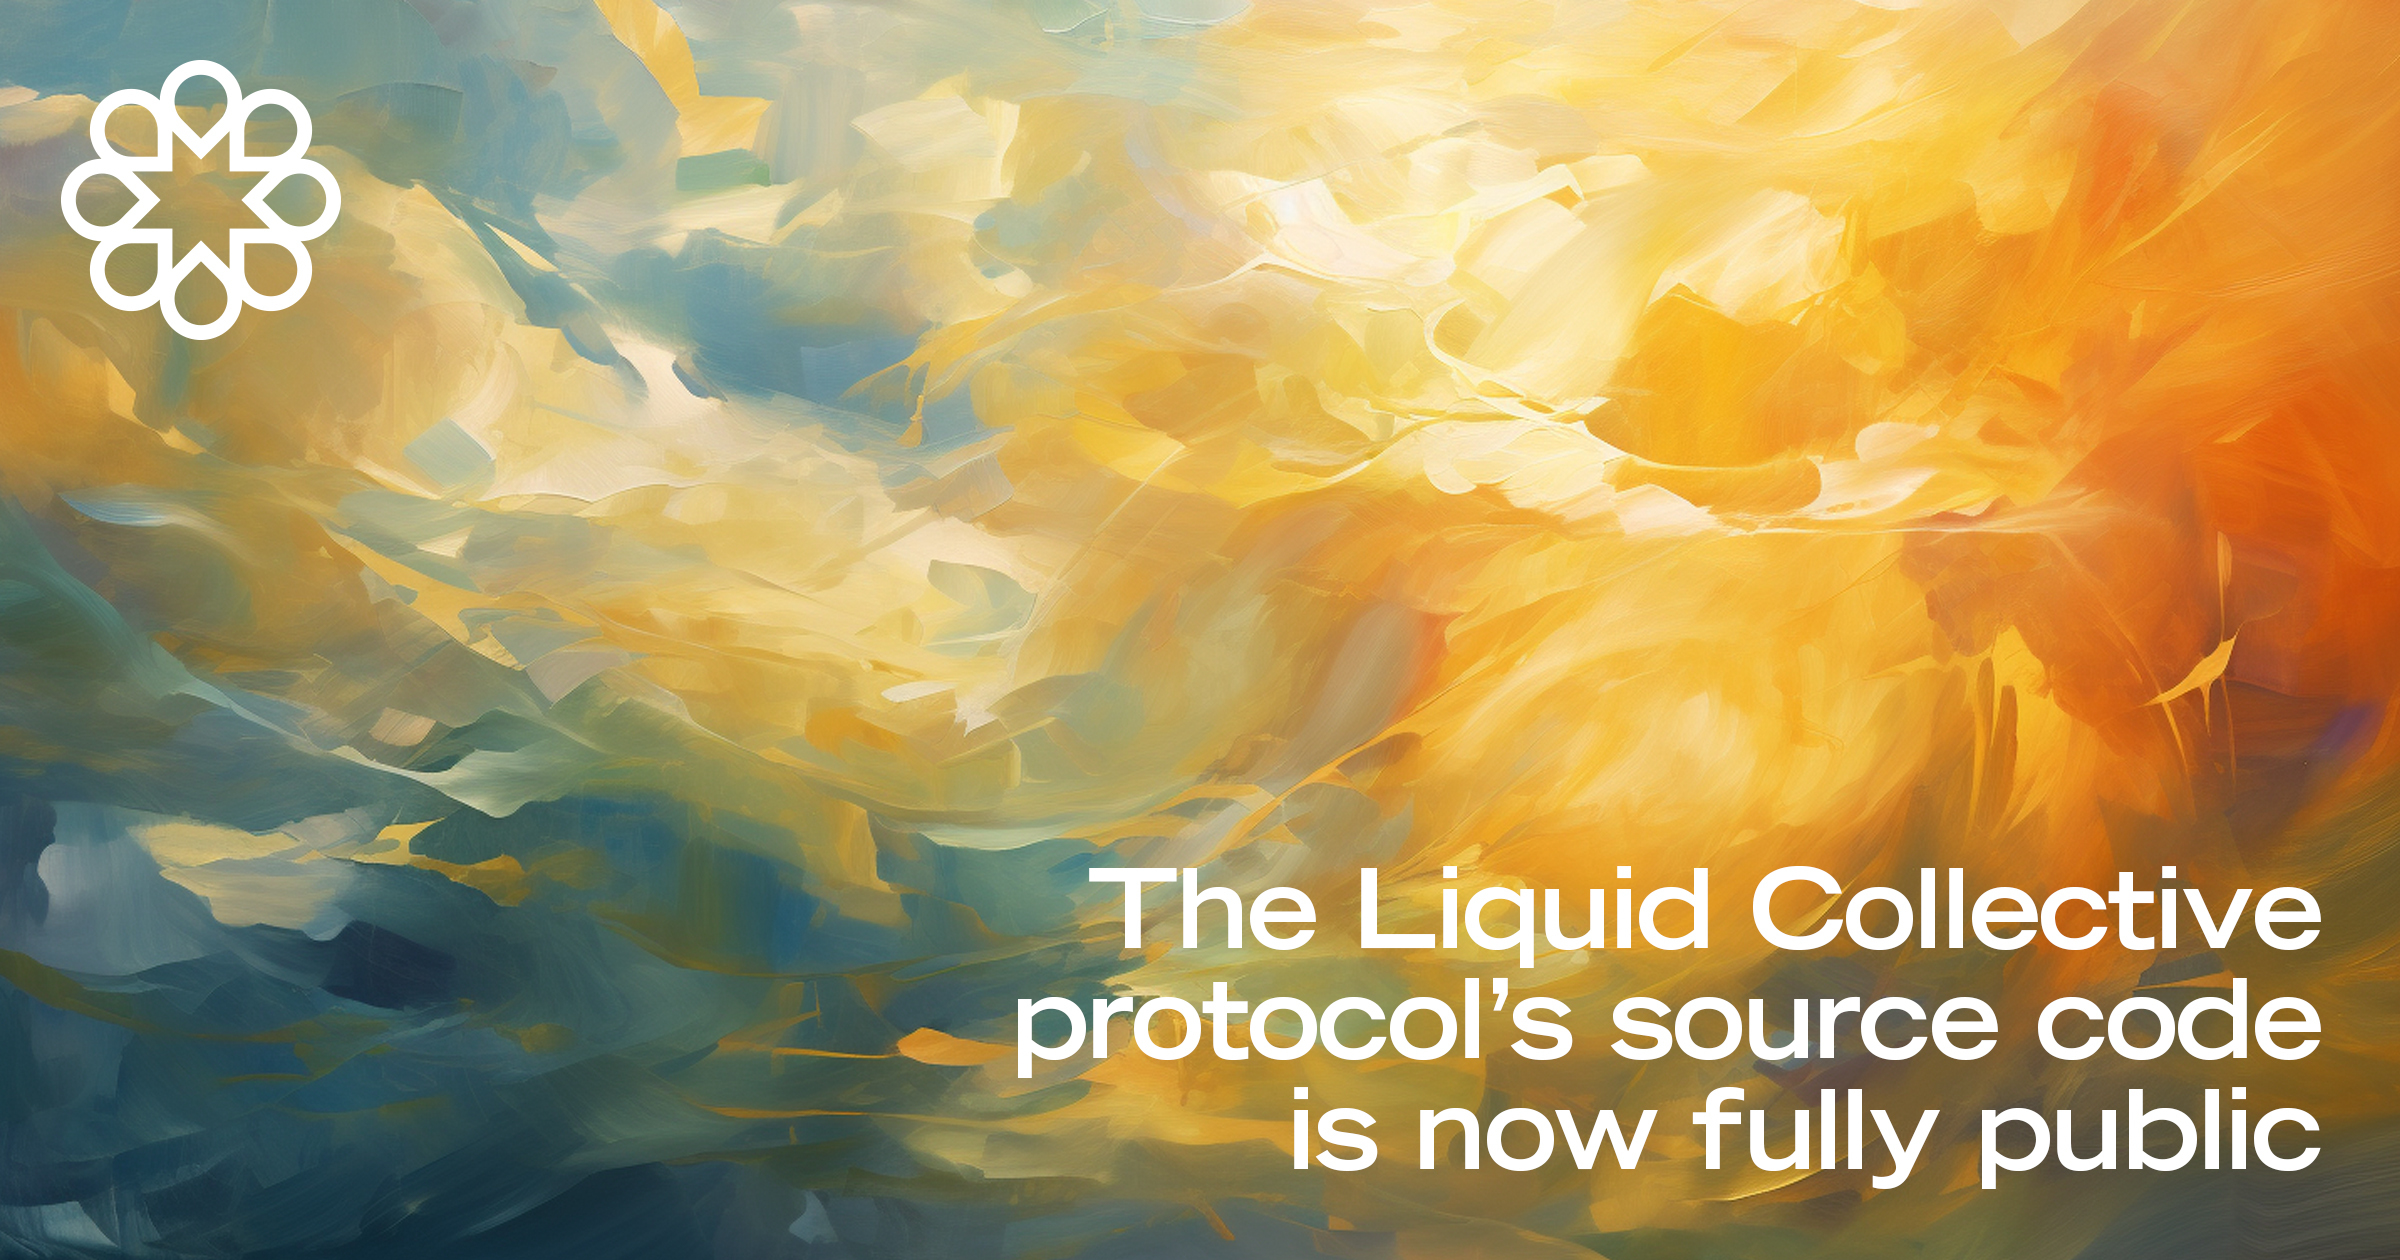 The Liquid Collective protocol's source code is now fully public